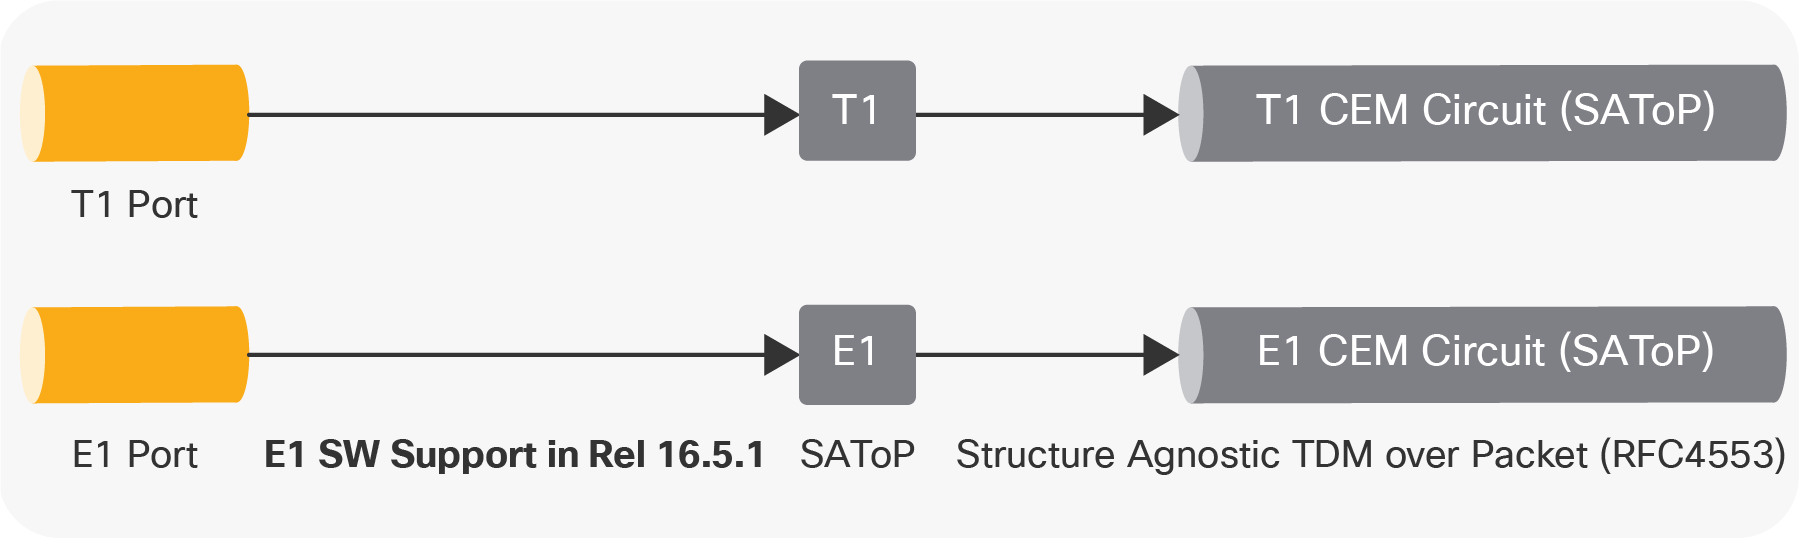 Supported CEM Types for T1/E1